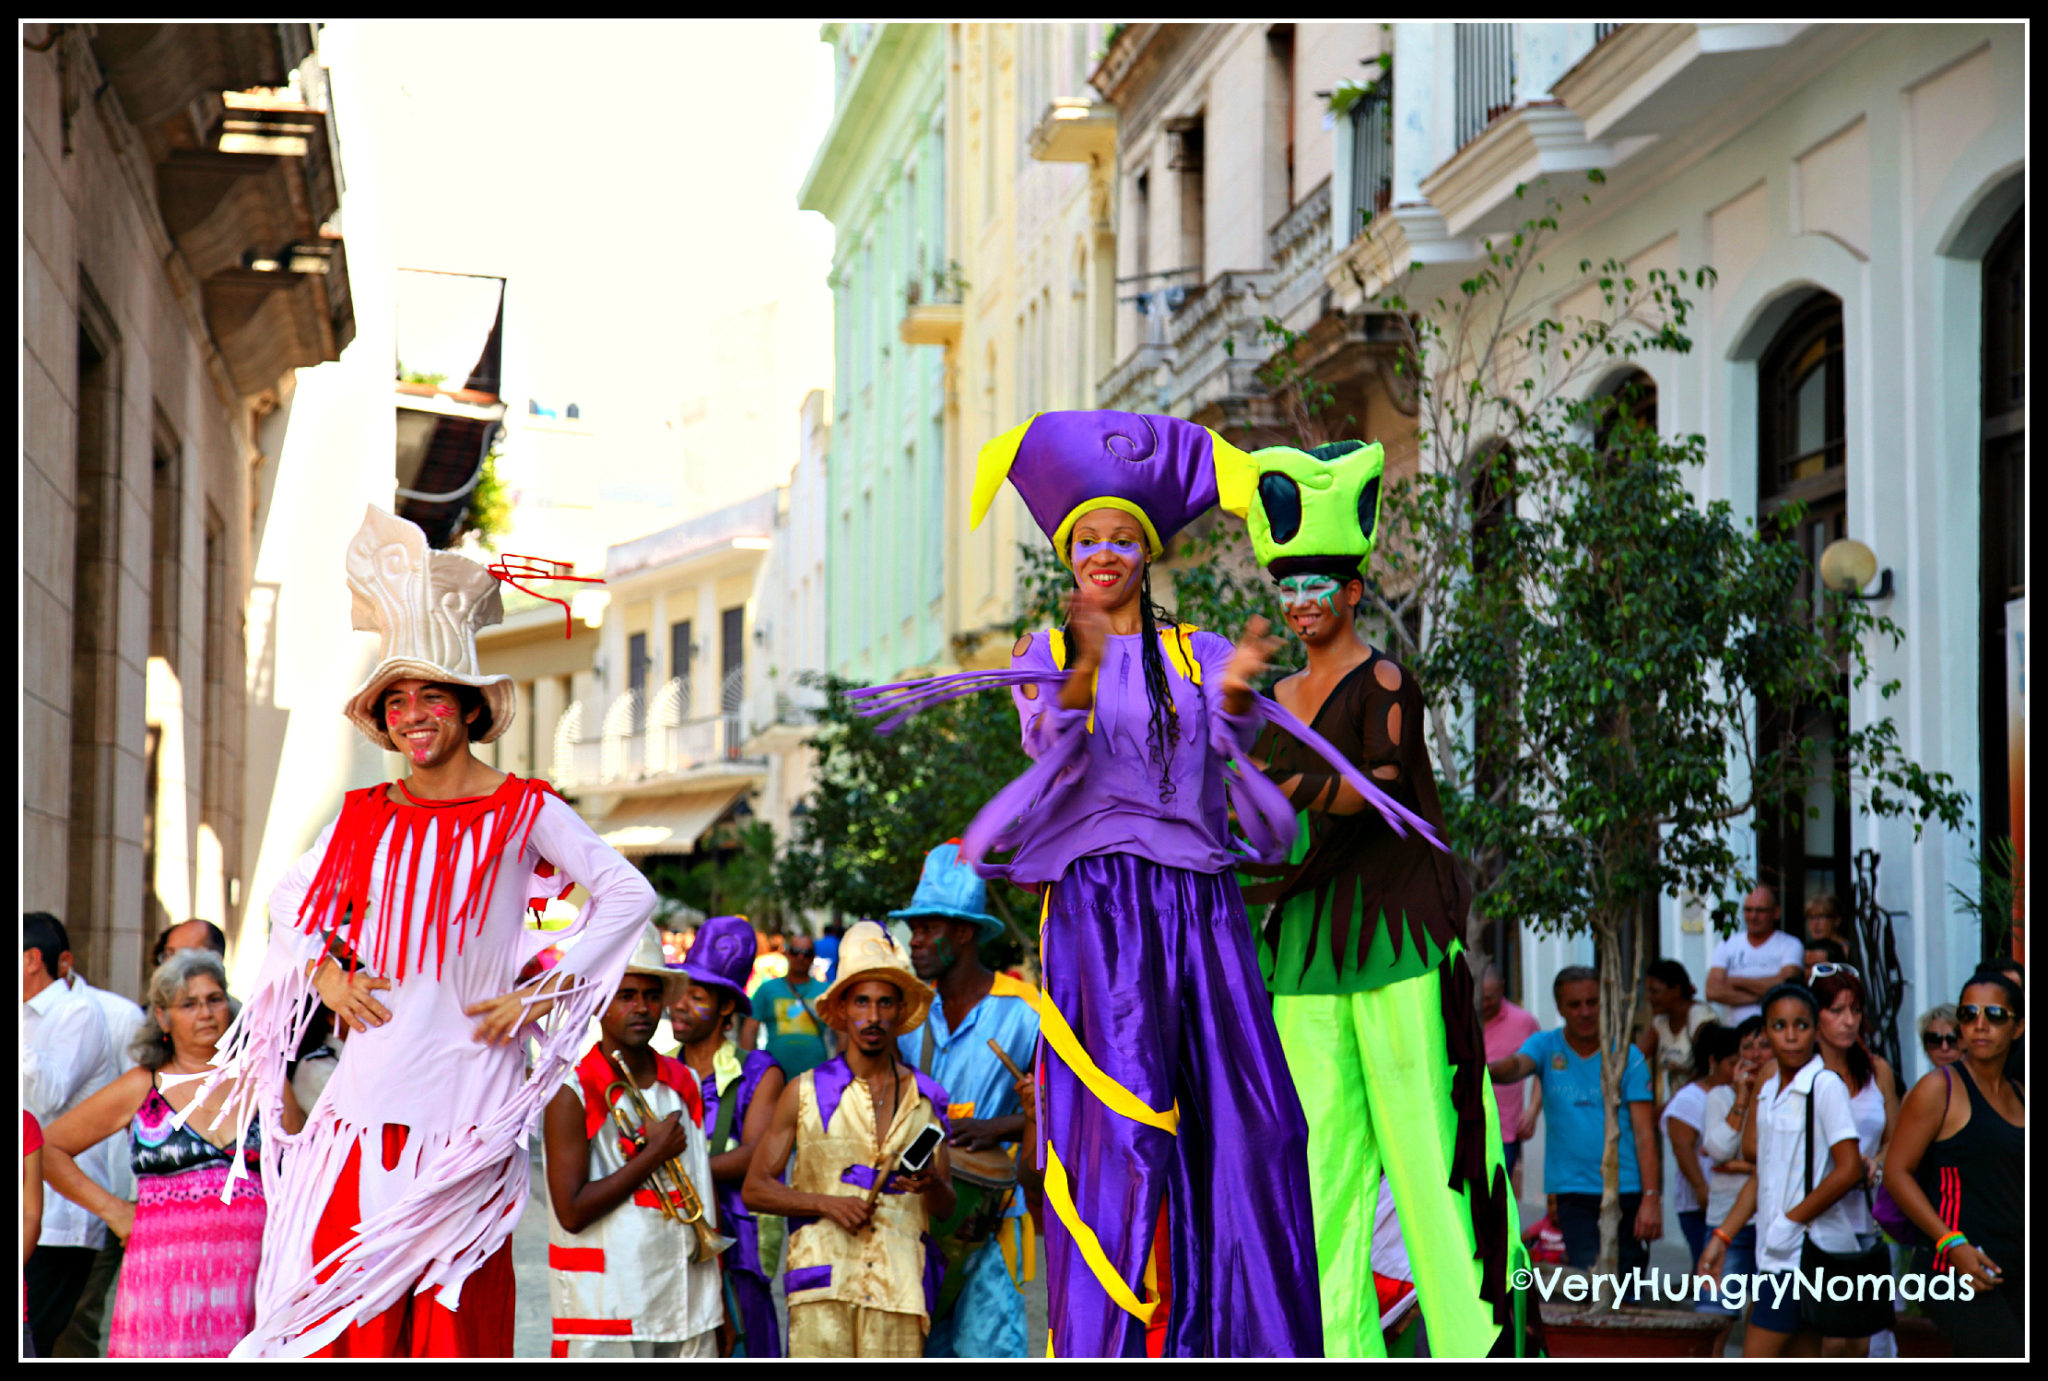 10 Photos of Cuba - Entertainment in the streets